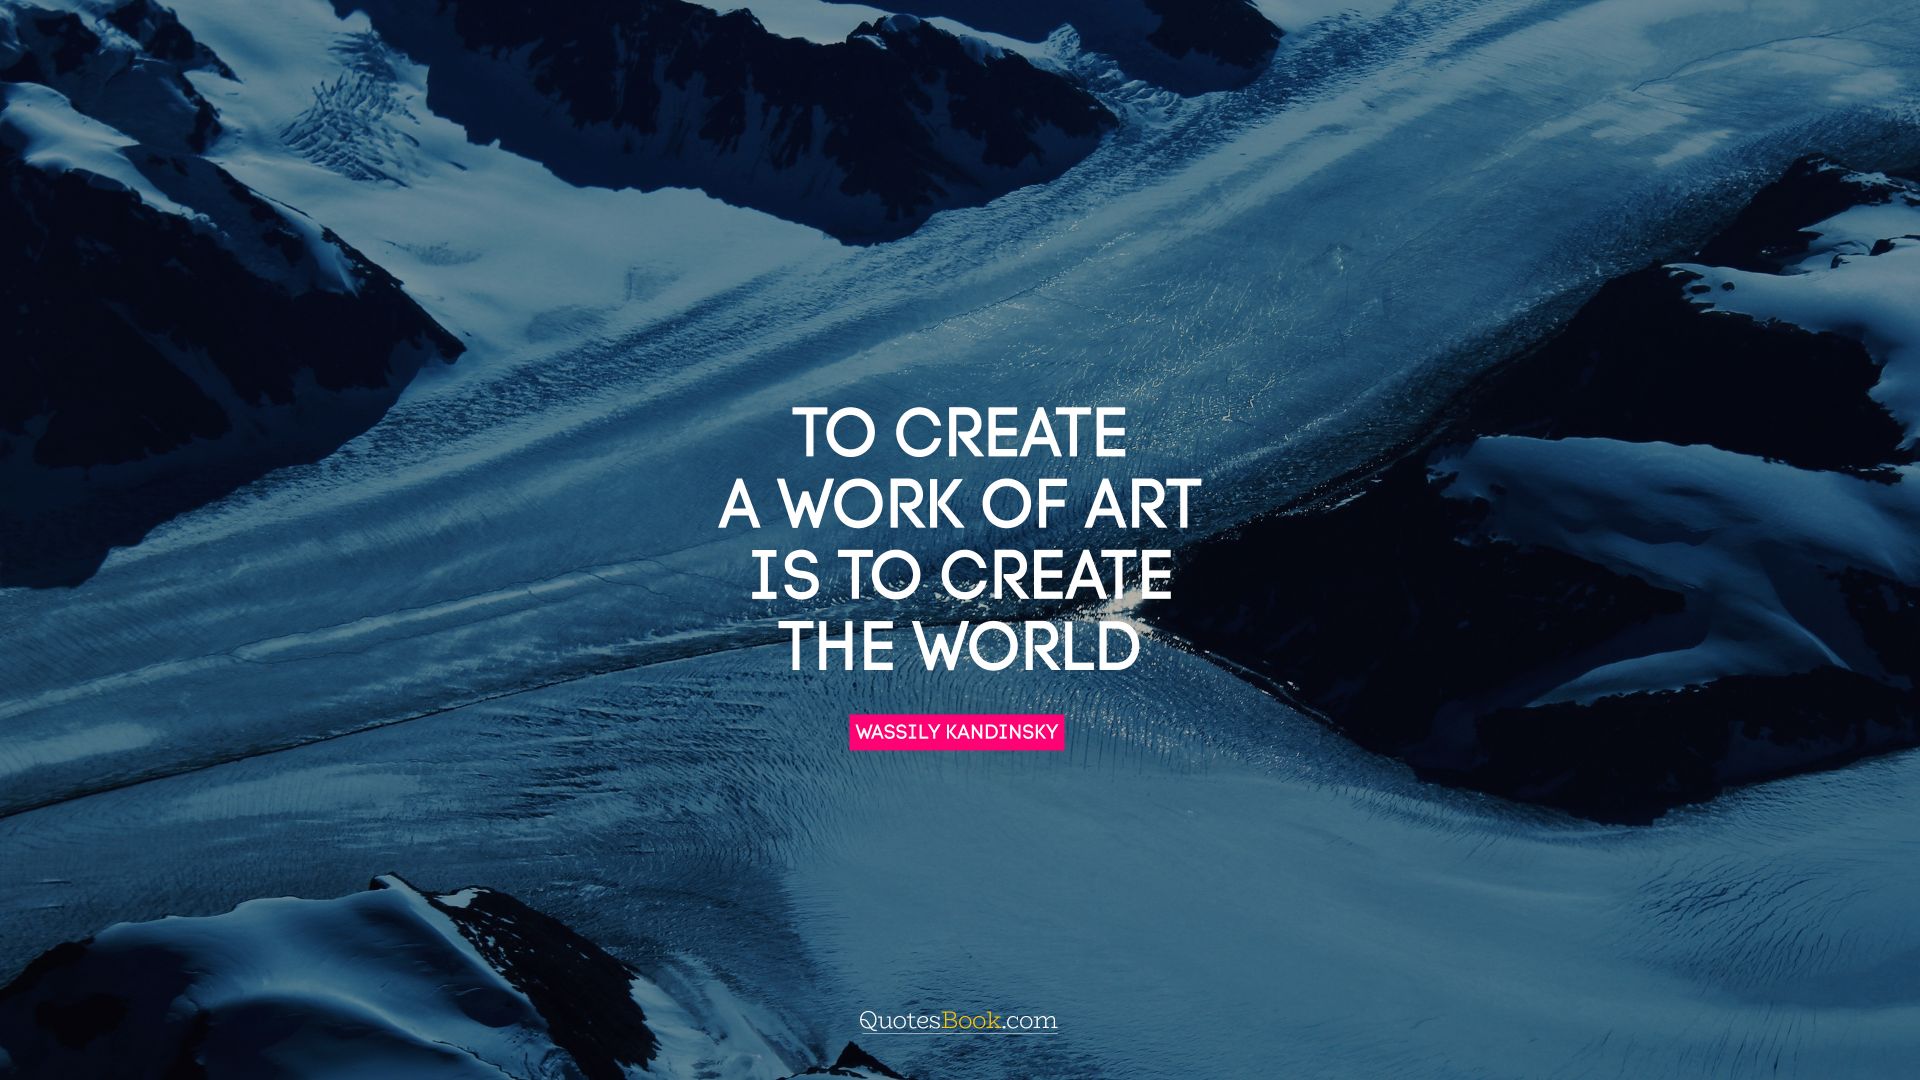 To create a work of art is to create the world. - Quote by Wassily Kandinsky